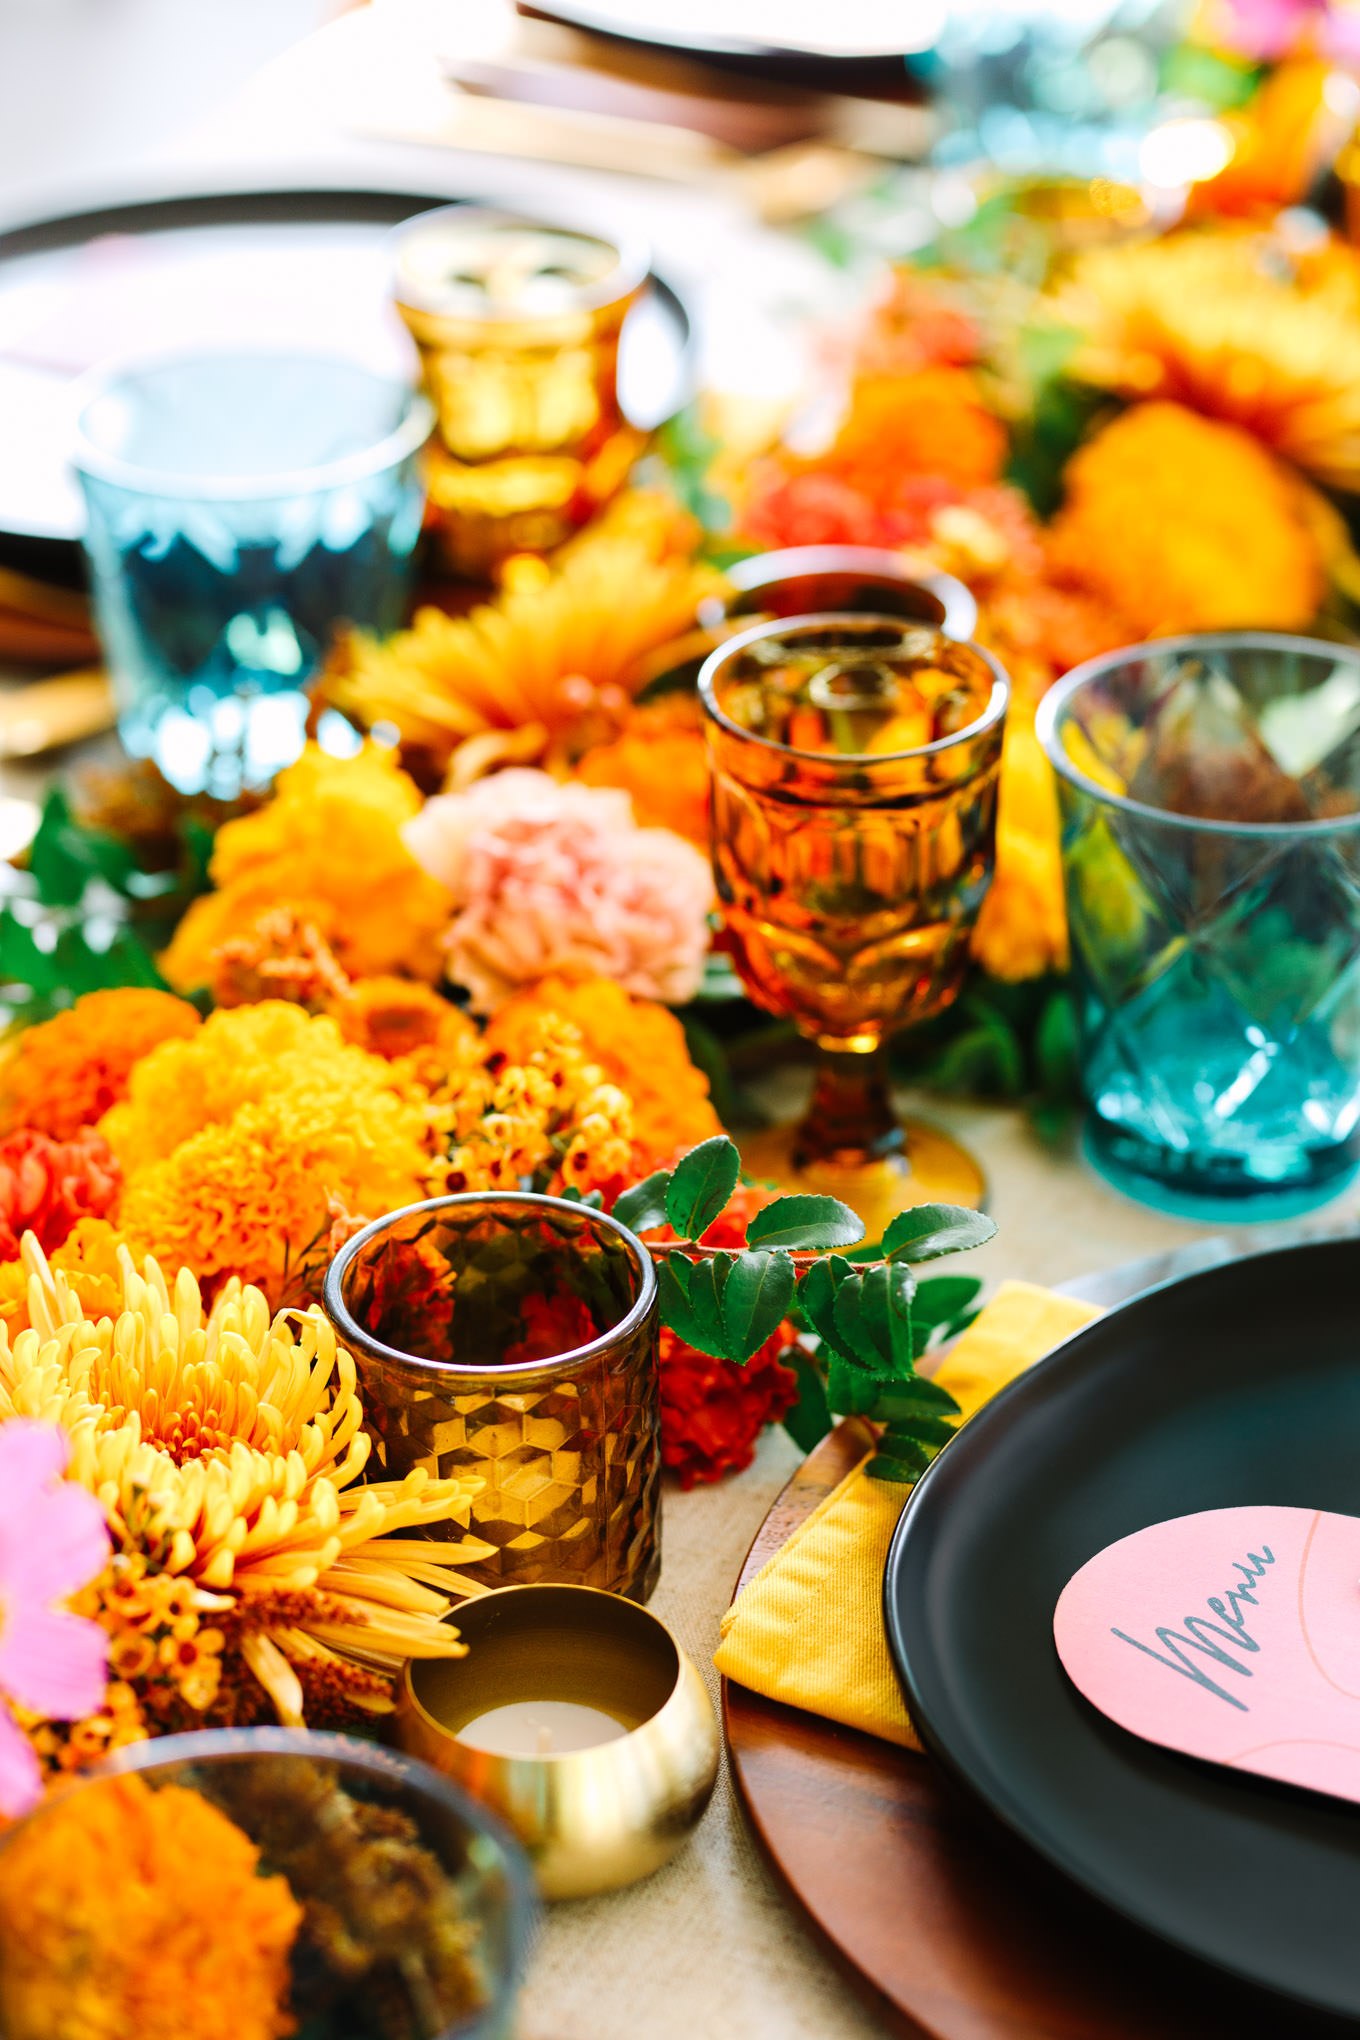 Unique wedding colors with tablescape | Vibrant backyard micro wedding featured on Green Wedding Shoes | Colorful LA wedding photography | #losangeleswedding #backyardwedding #microwedding #laweddingphotographer Source: Mary Costa Photography | Los Angeles